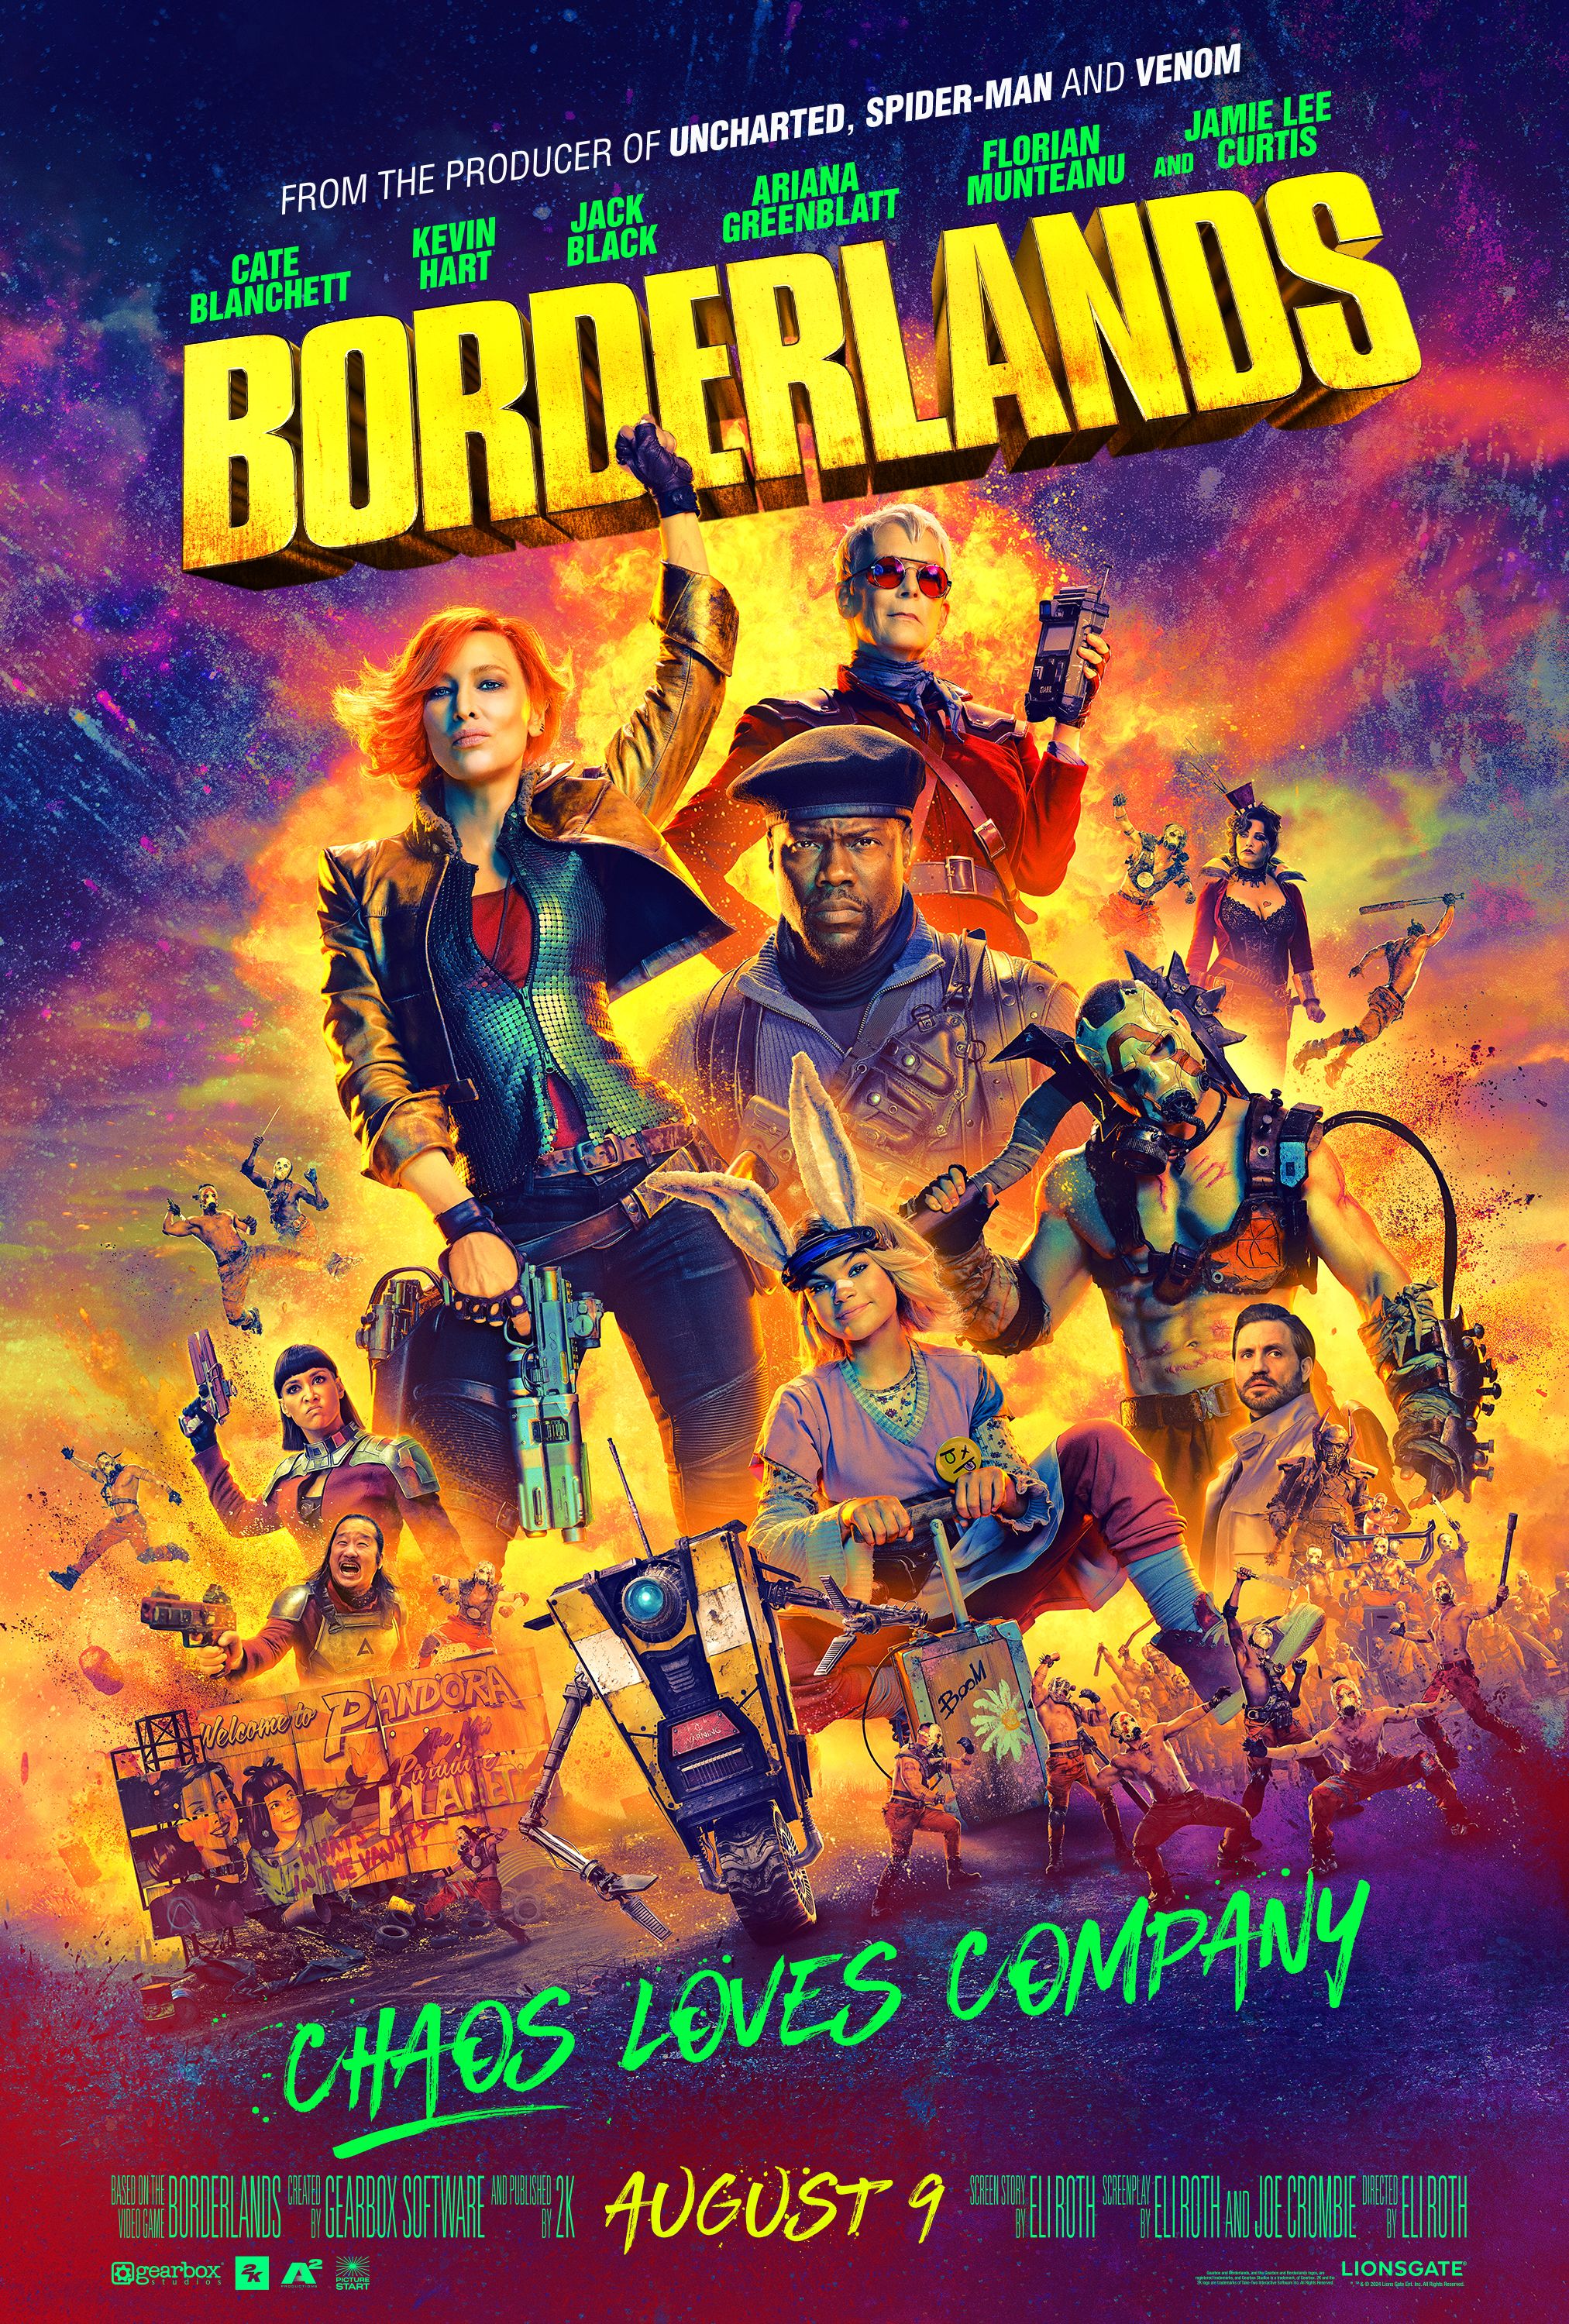 The latest Borderlands poster, which was revealed at CCXP Mexico